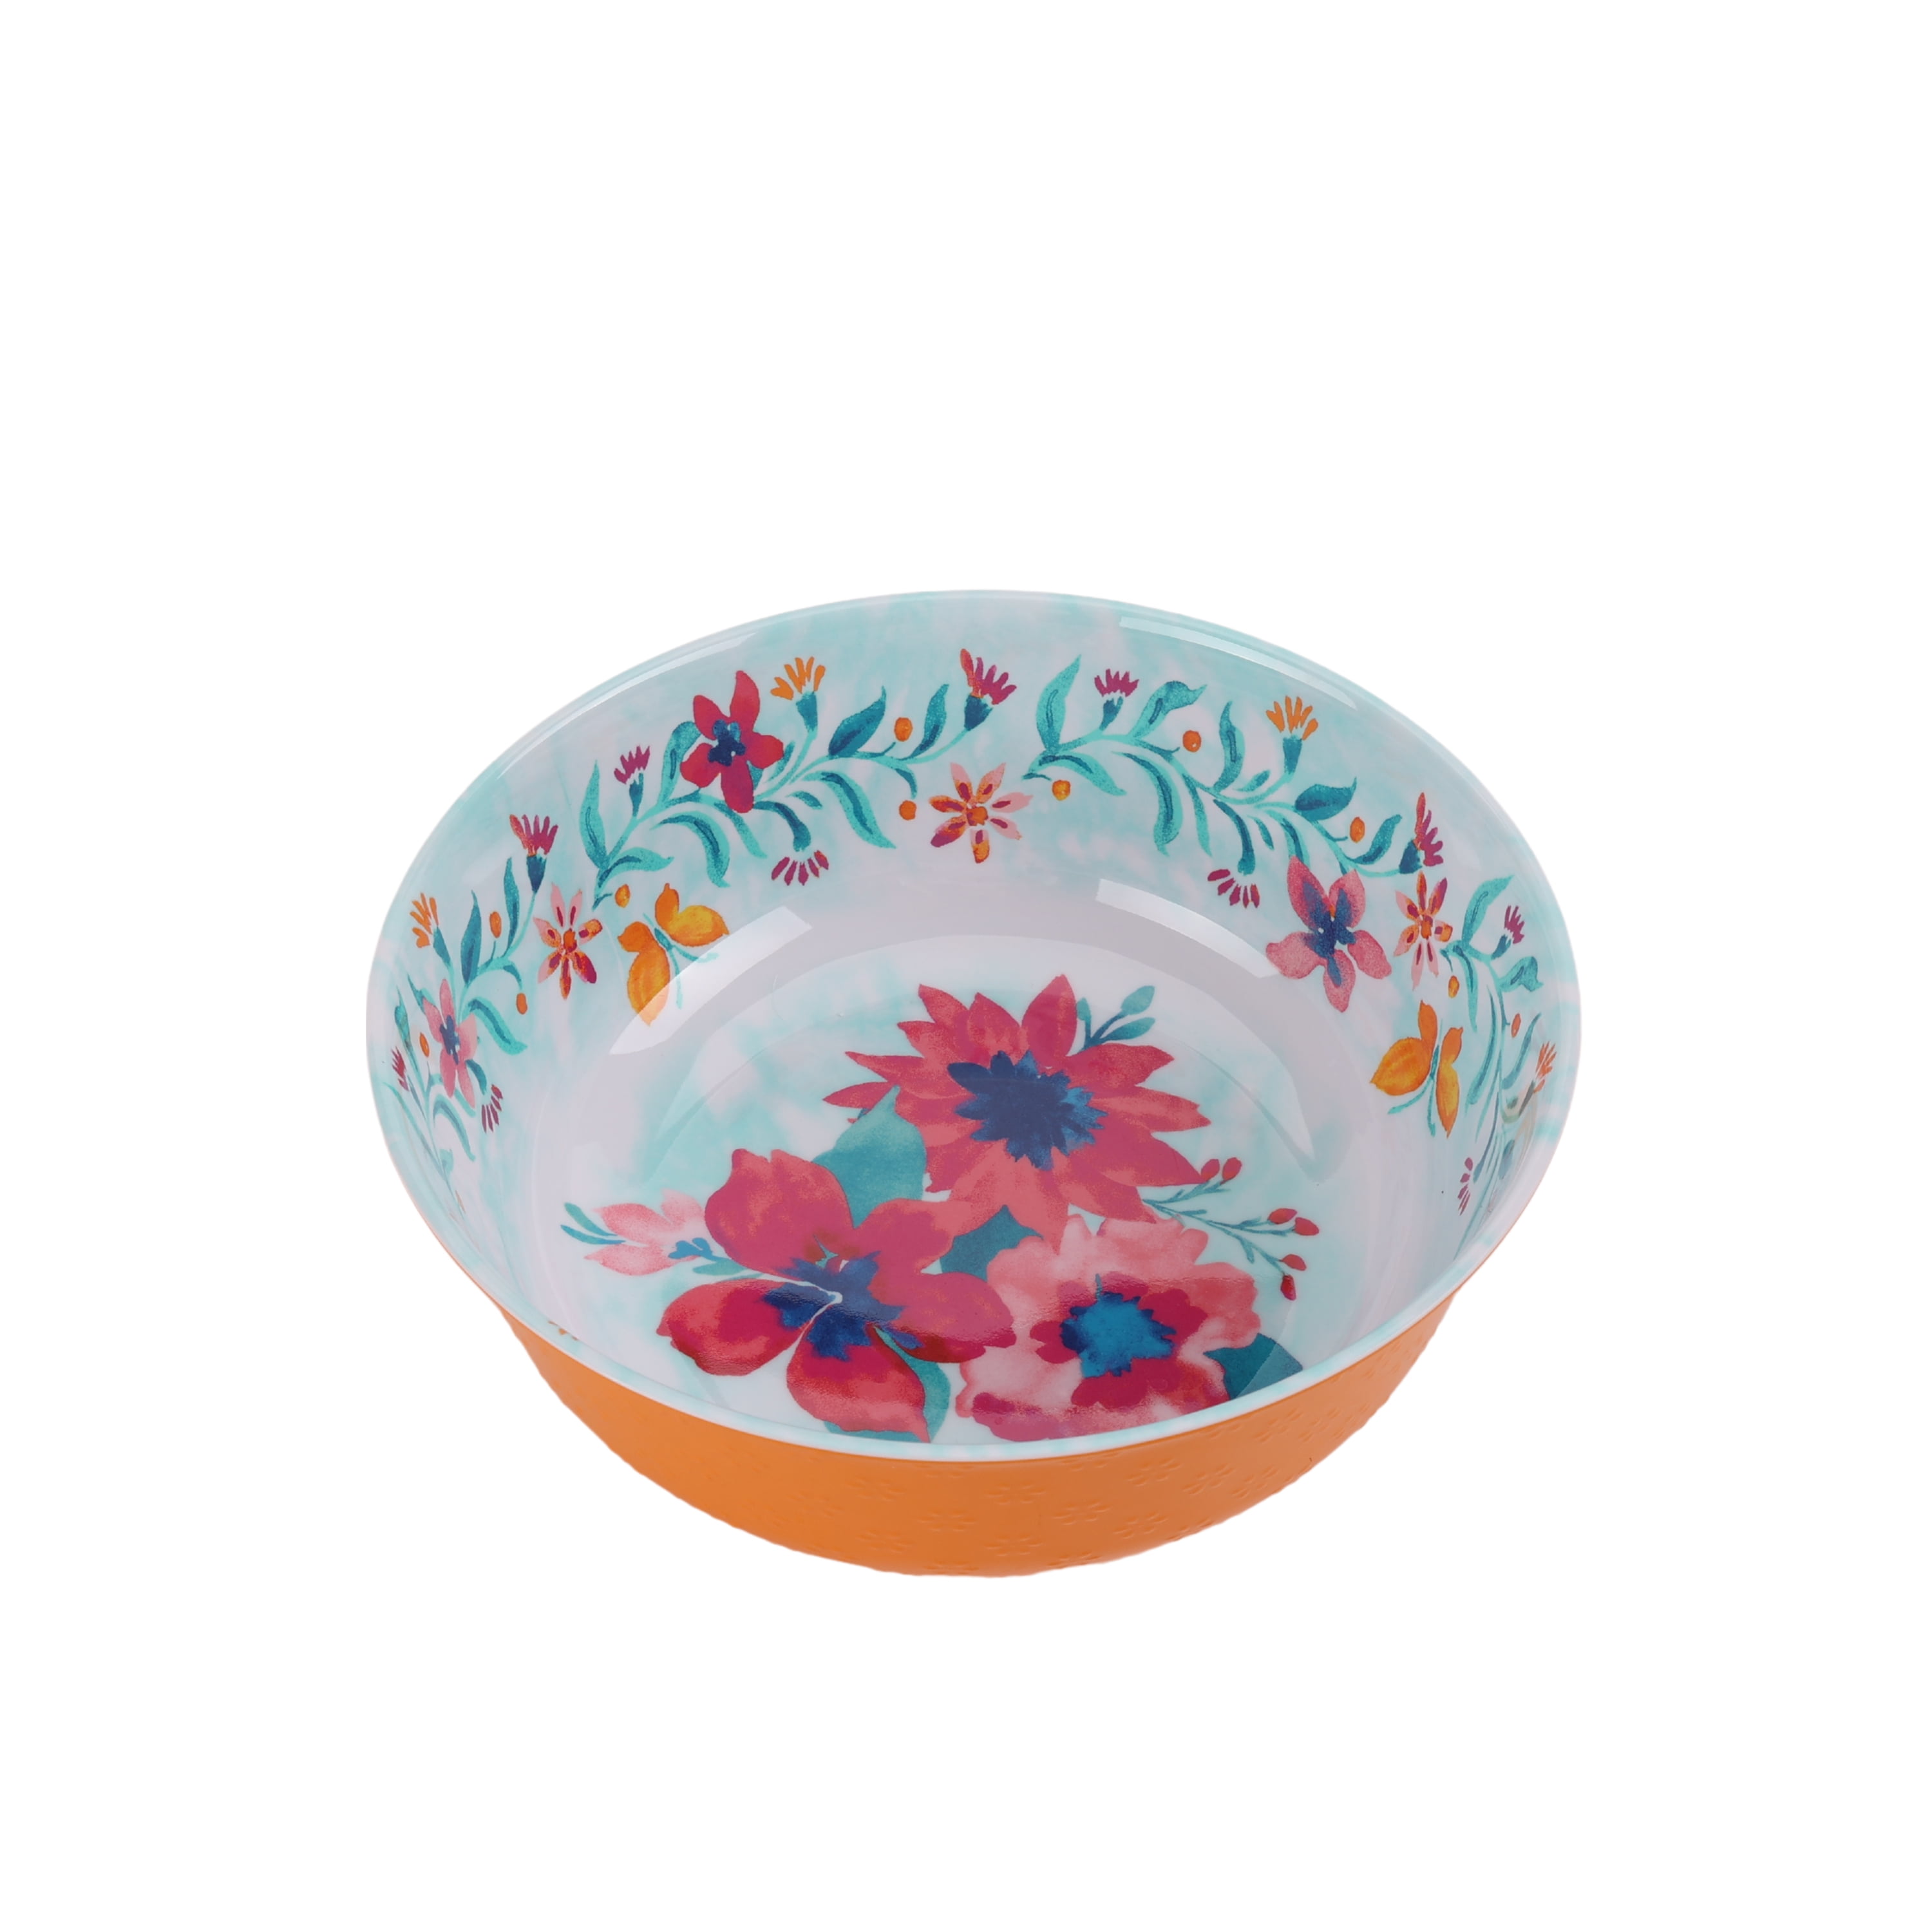 The Pioneer Woman Festive Forest 6-Piece Embossed Melamine Serving Bowl Set with Lids, Size: Large Bowl: Dia 11.78 inch x 4.68 H inch Medium Bowl: Dia